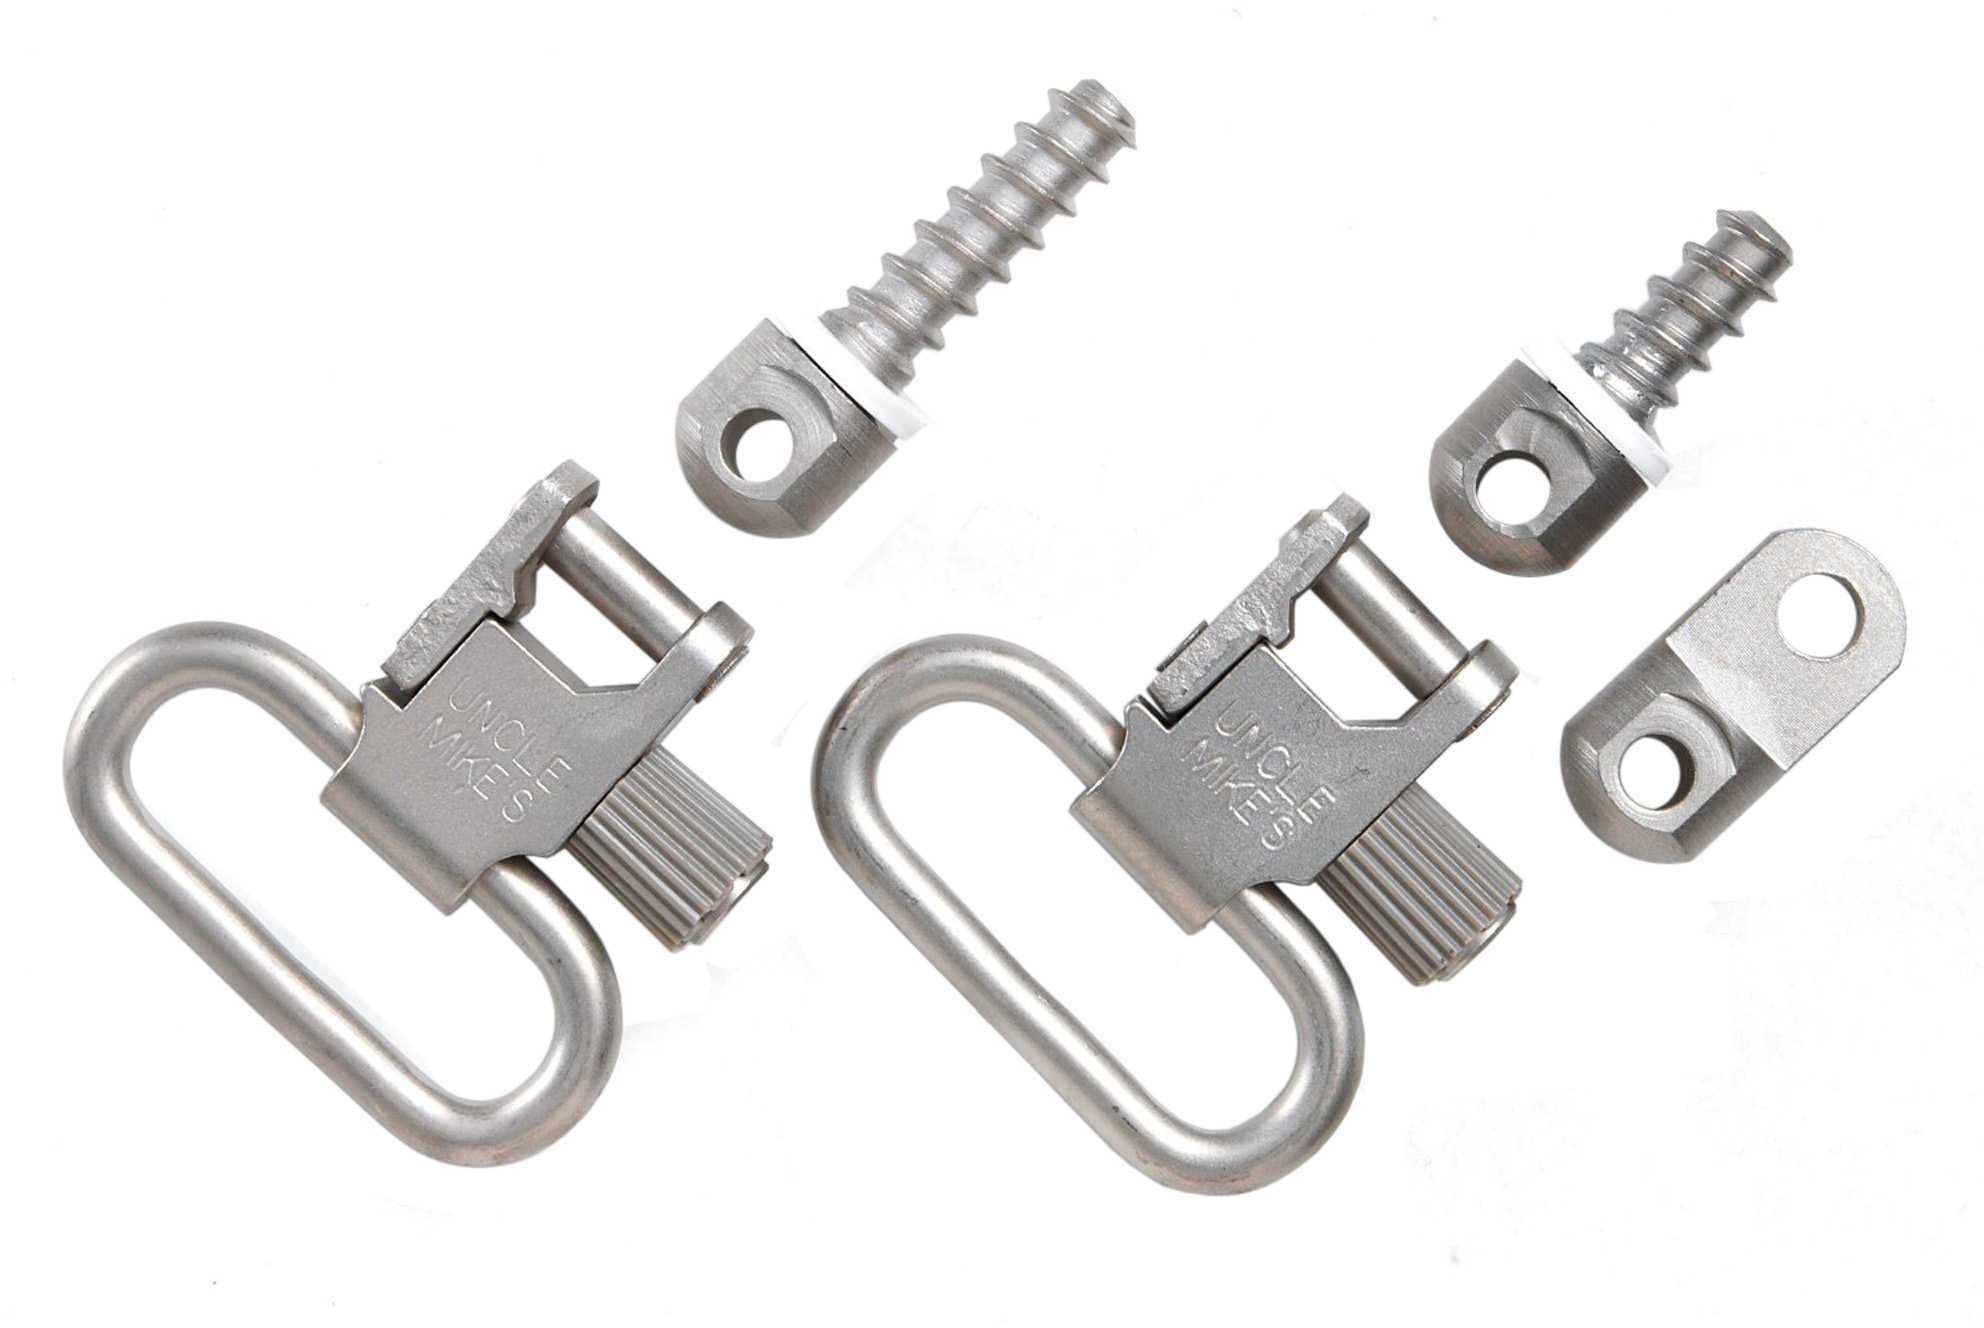 Uncle Mikes 1" Quick Detach Nickel Sling Swivels For Ruger® Autos/Carbines Md: 14622